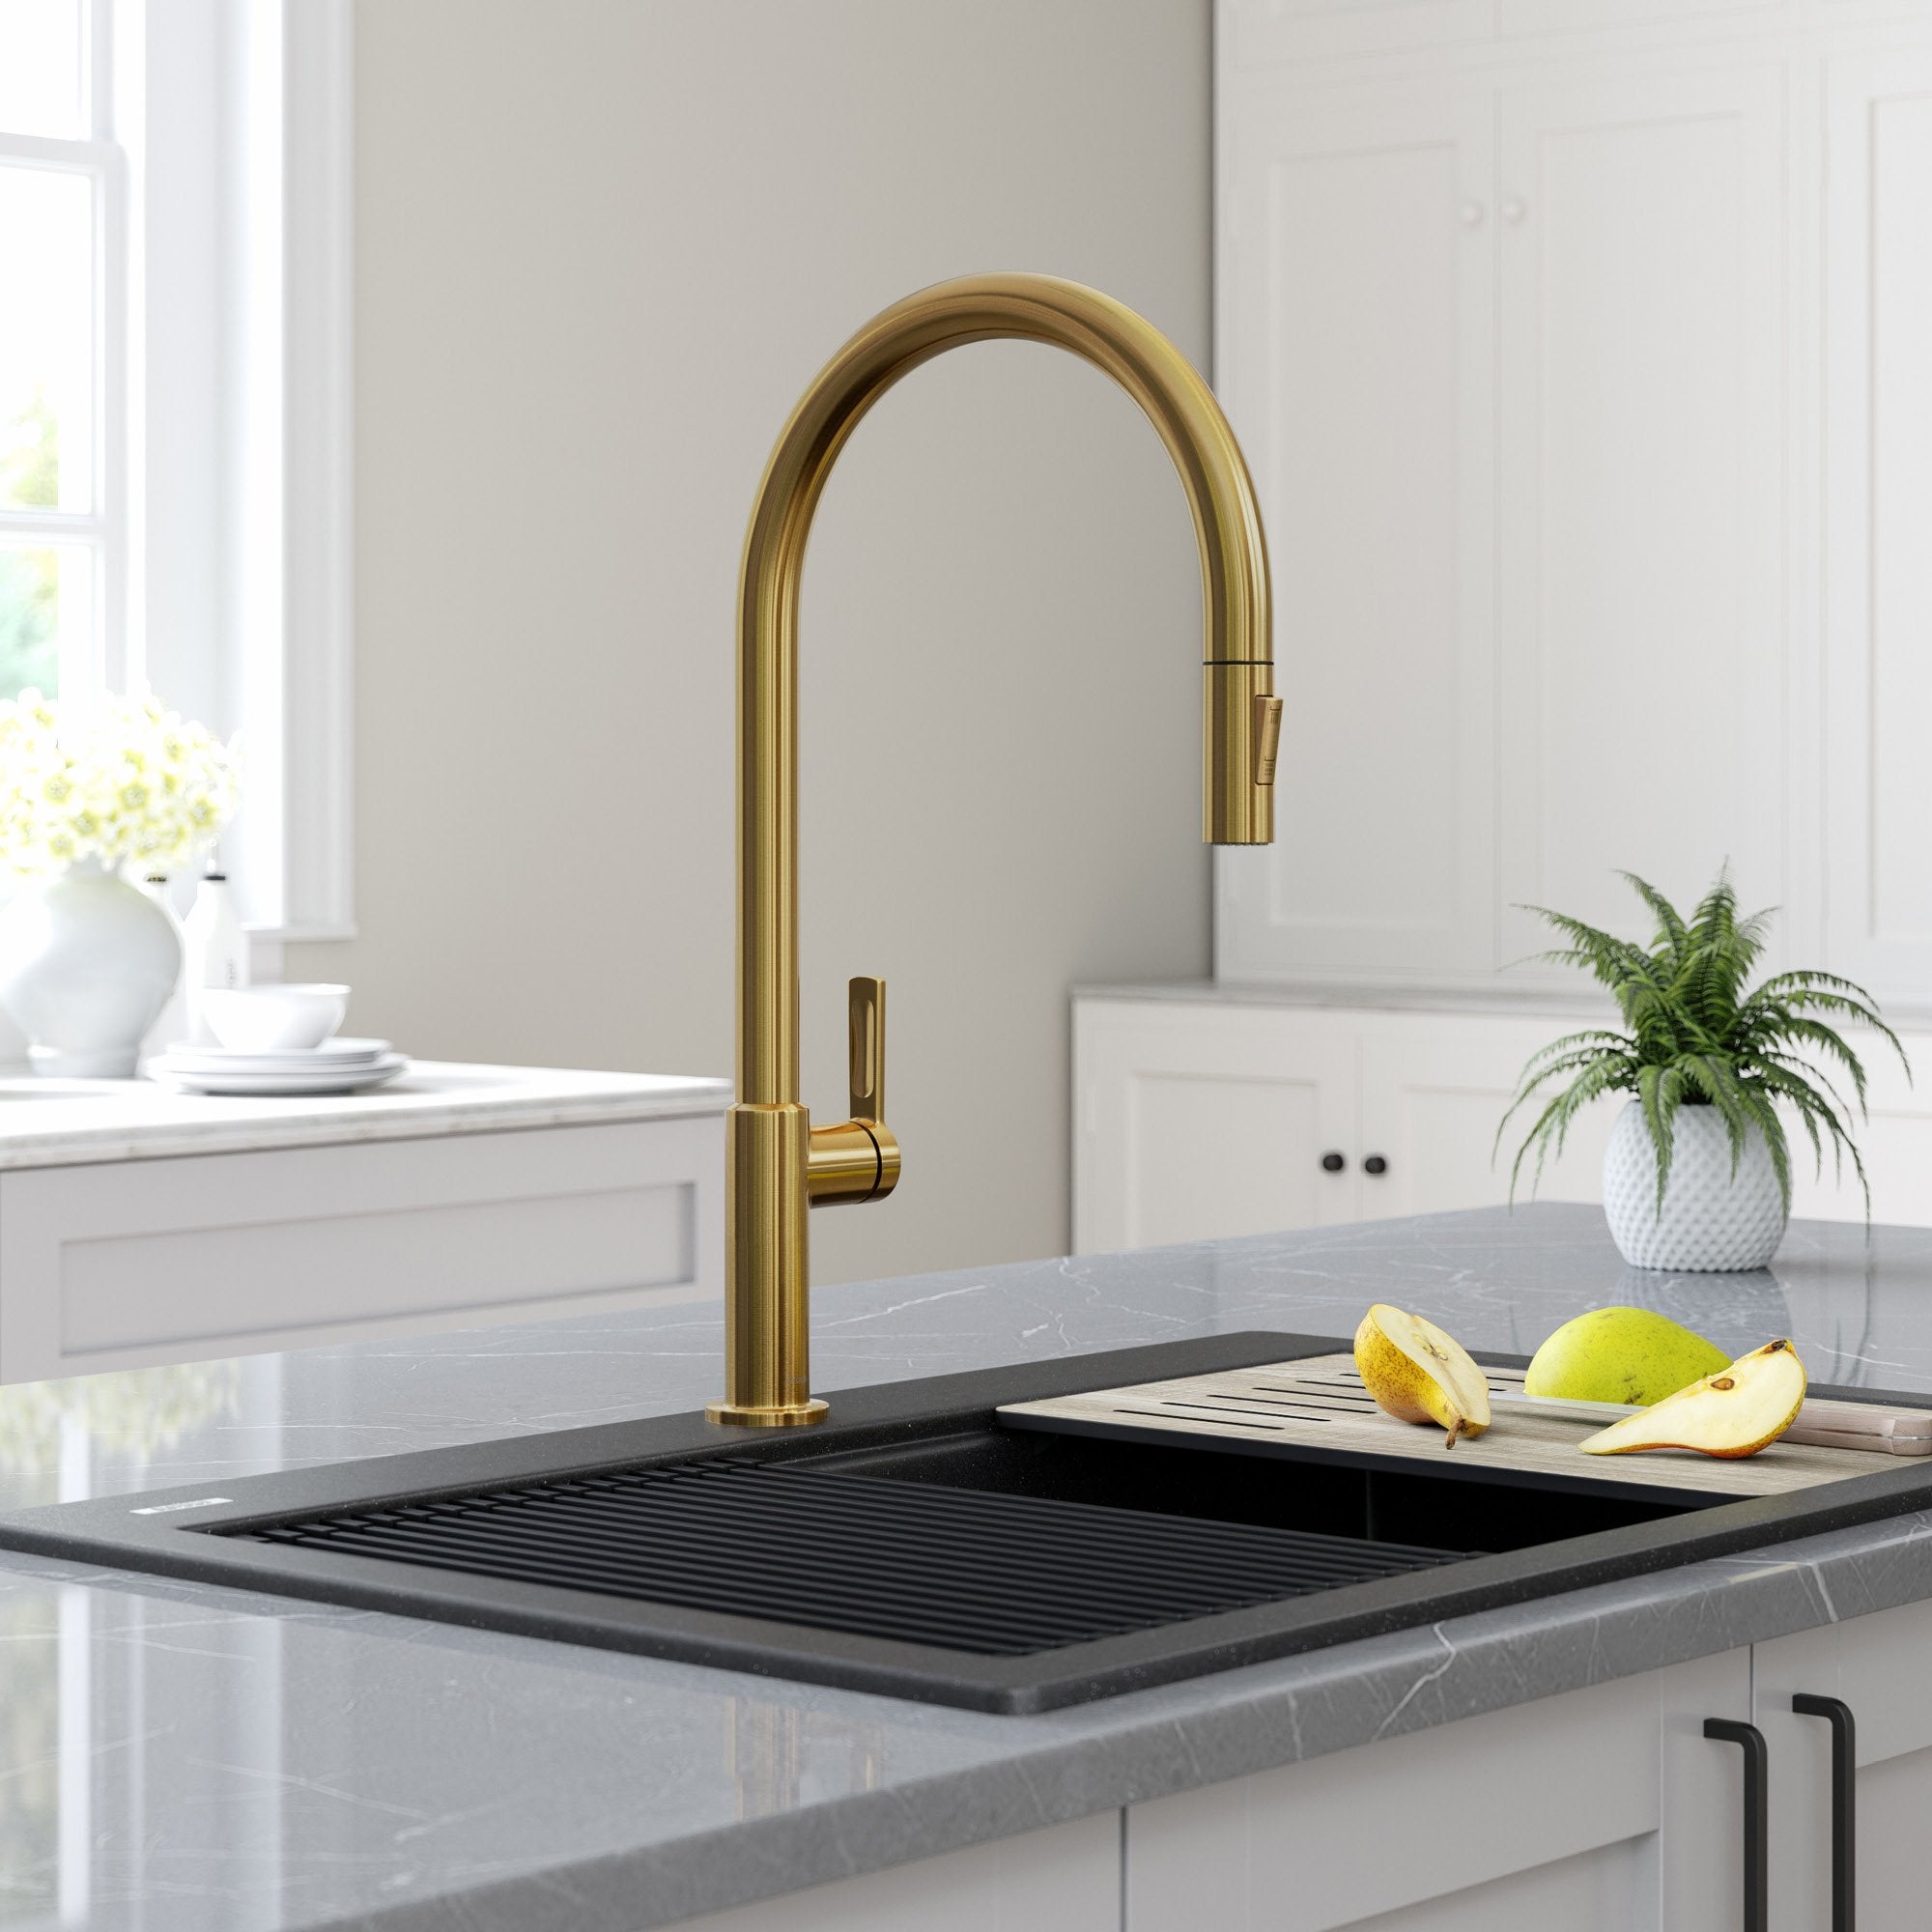 KRAUS Oletto High-Arc Single Handle Pull-Down Kitchen Faucet in Brushed Brass KPF-2821BB | DirectSinks